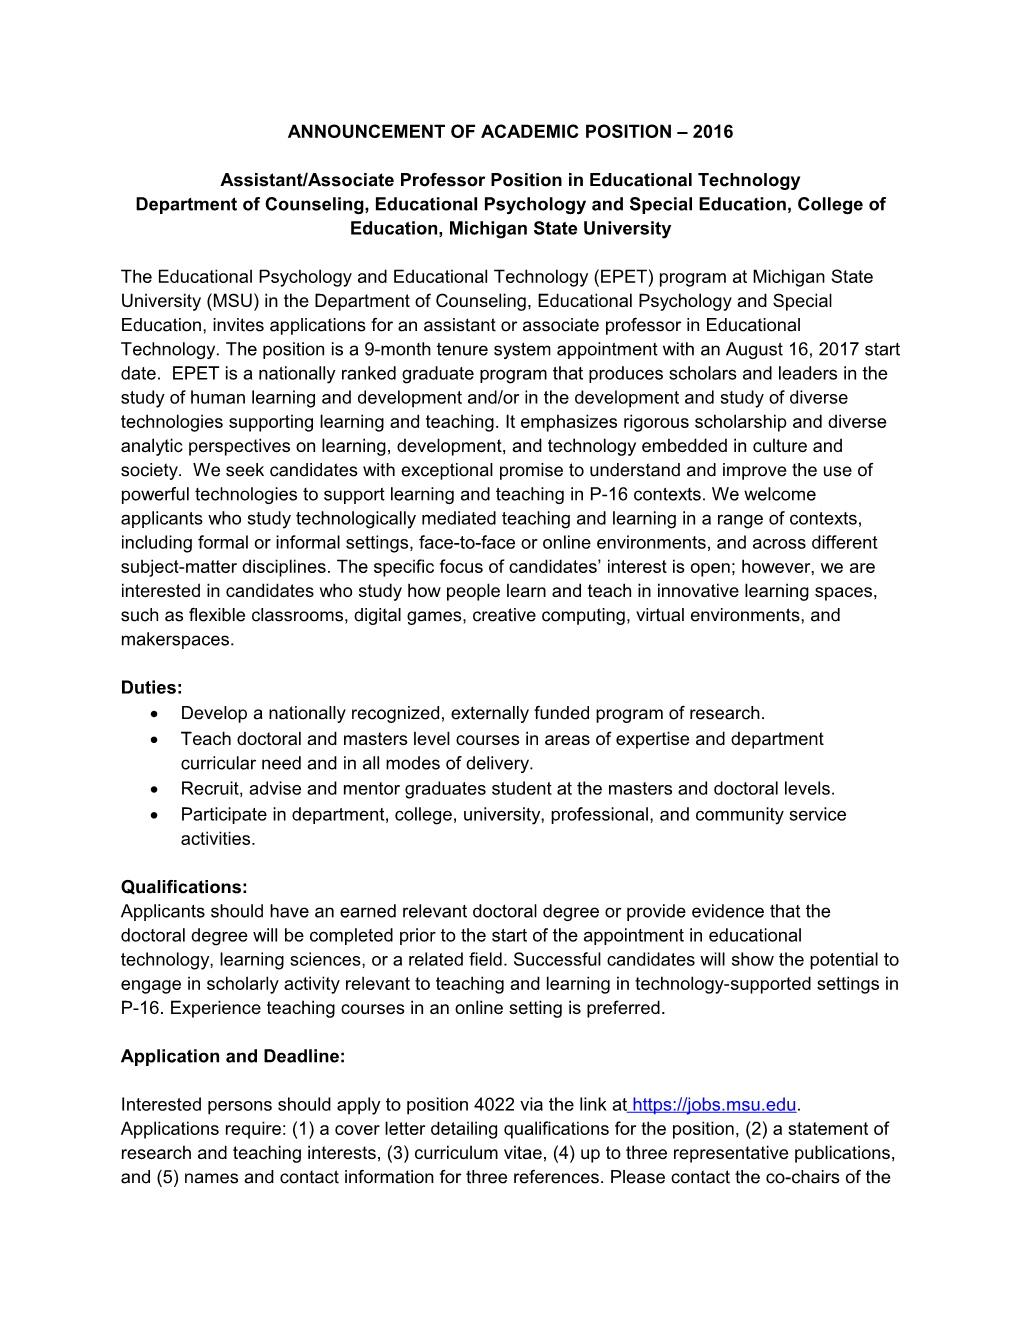 Assistant/Associate Professor Position in Educational Technology